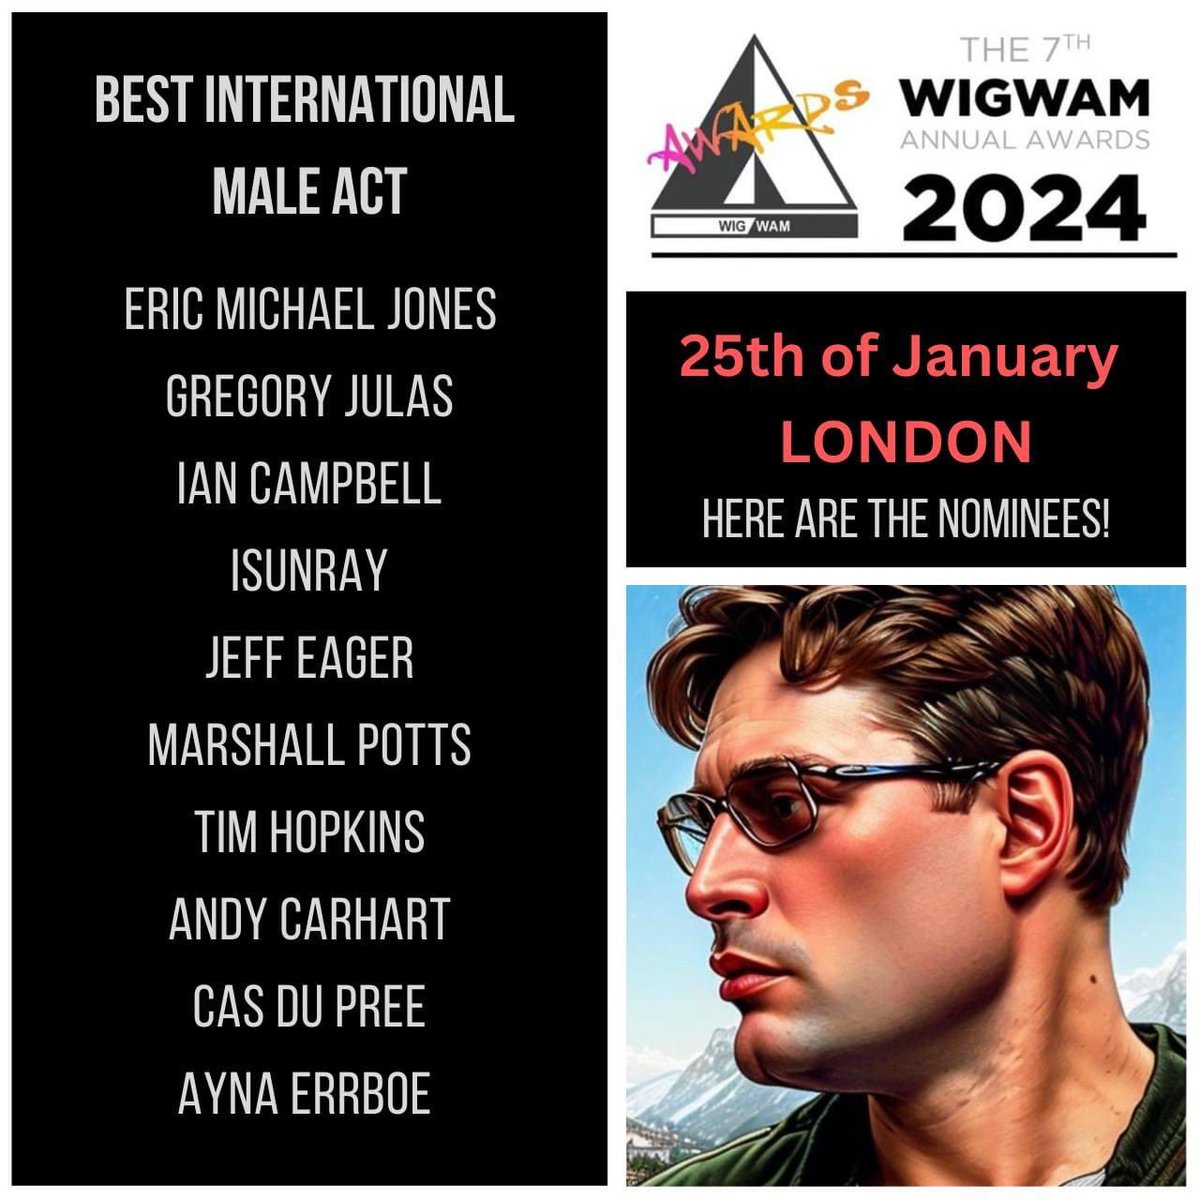 I’m so excited and blown away to be nominated for BEST INTERNATIONAL MALE ACT by Radio Wigwam 2024.

Congratulations to all the other  nominees!

#futurepop #newzealand #London #radiowigwam #radiowigwamawards
#electro #electronicmusic  #synthpop #isunray